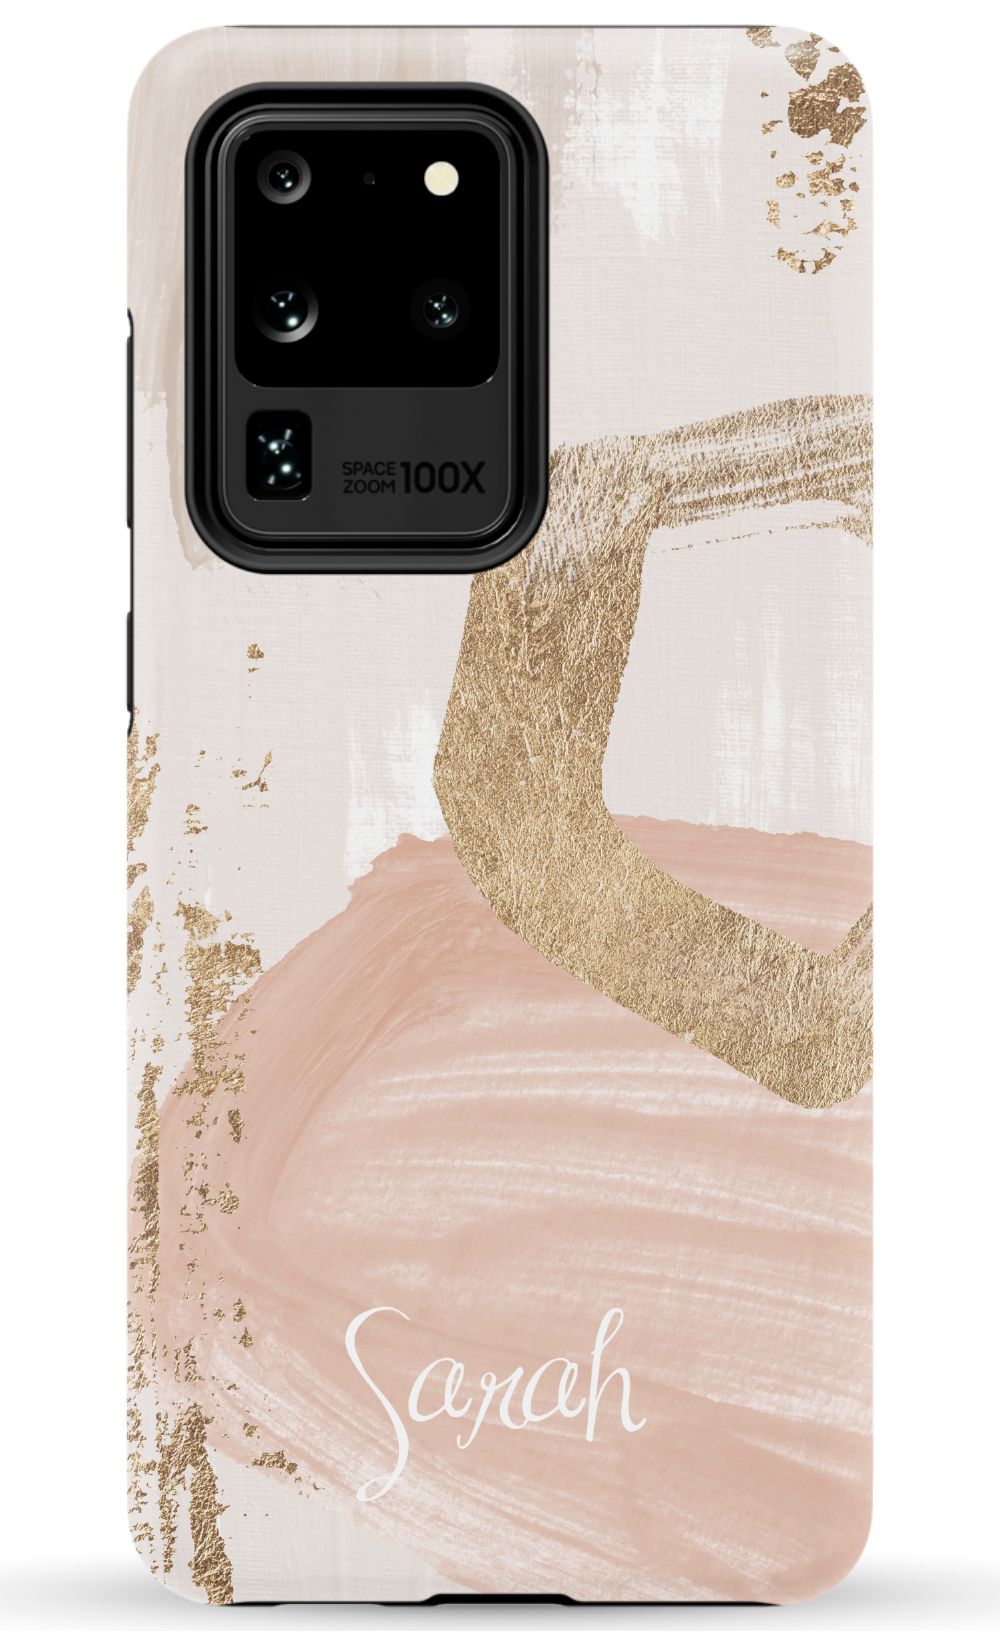 Blush & Gold Personalized Phone Case